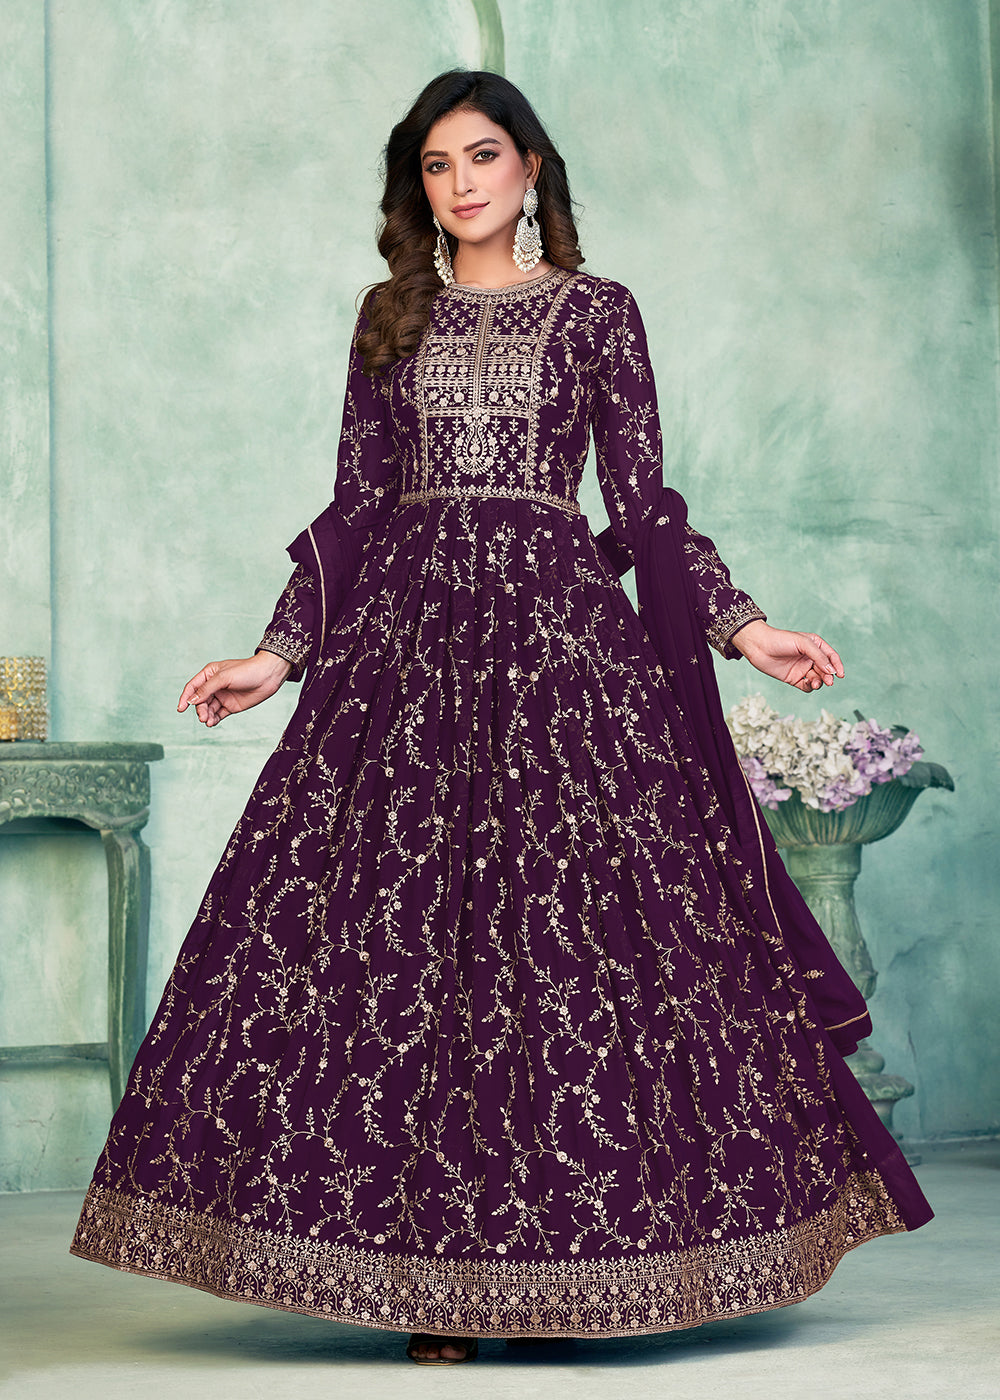 Buy Now Designer Purple Embroidered Wedding Party Anarkali Suit Online in USA, UK, Australia, New Zealand, Canada & Worldwide at Empress Clothing.